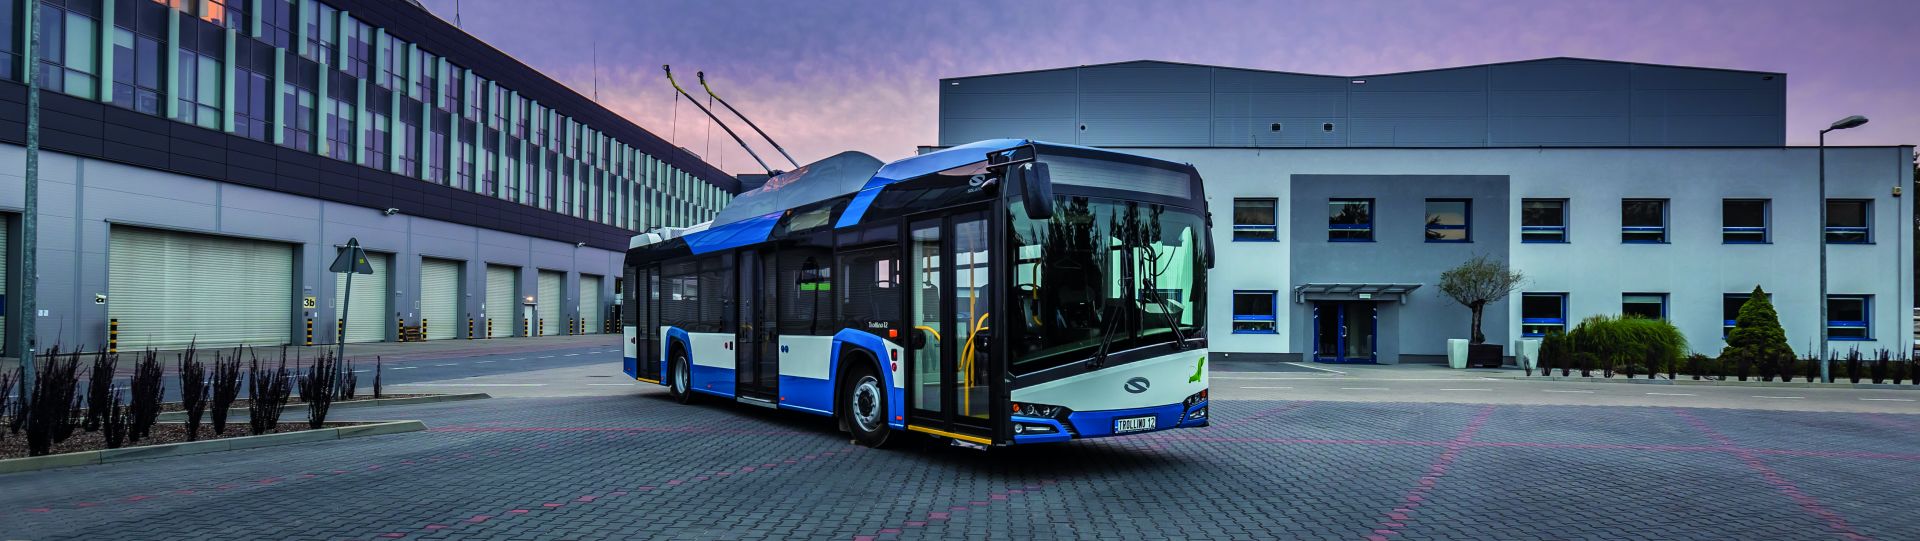 Solaris wins a large contract for the supply of trolleybuses to Saint-Etienne in France